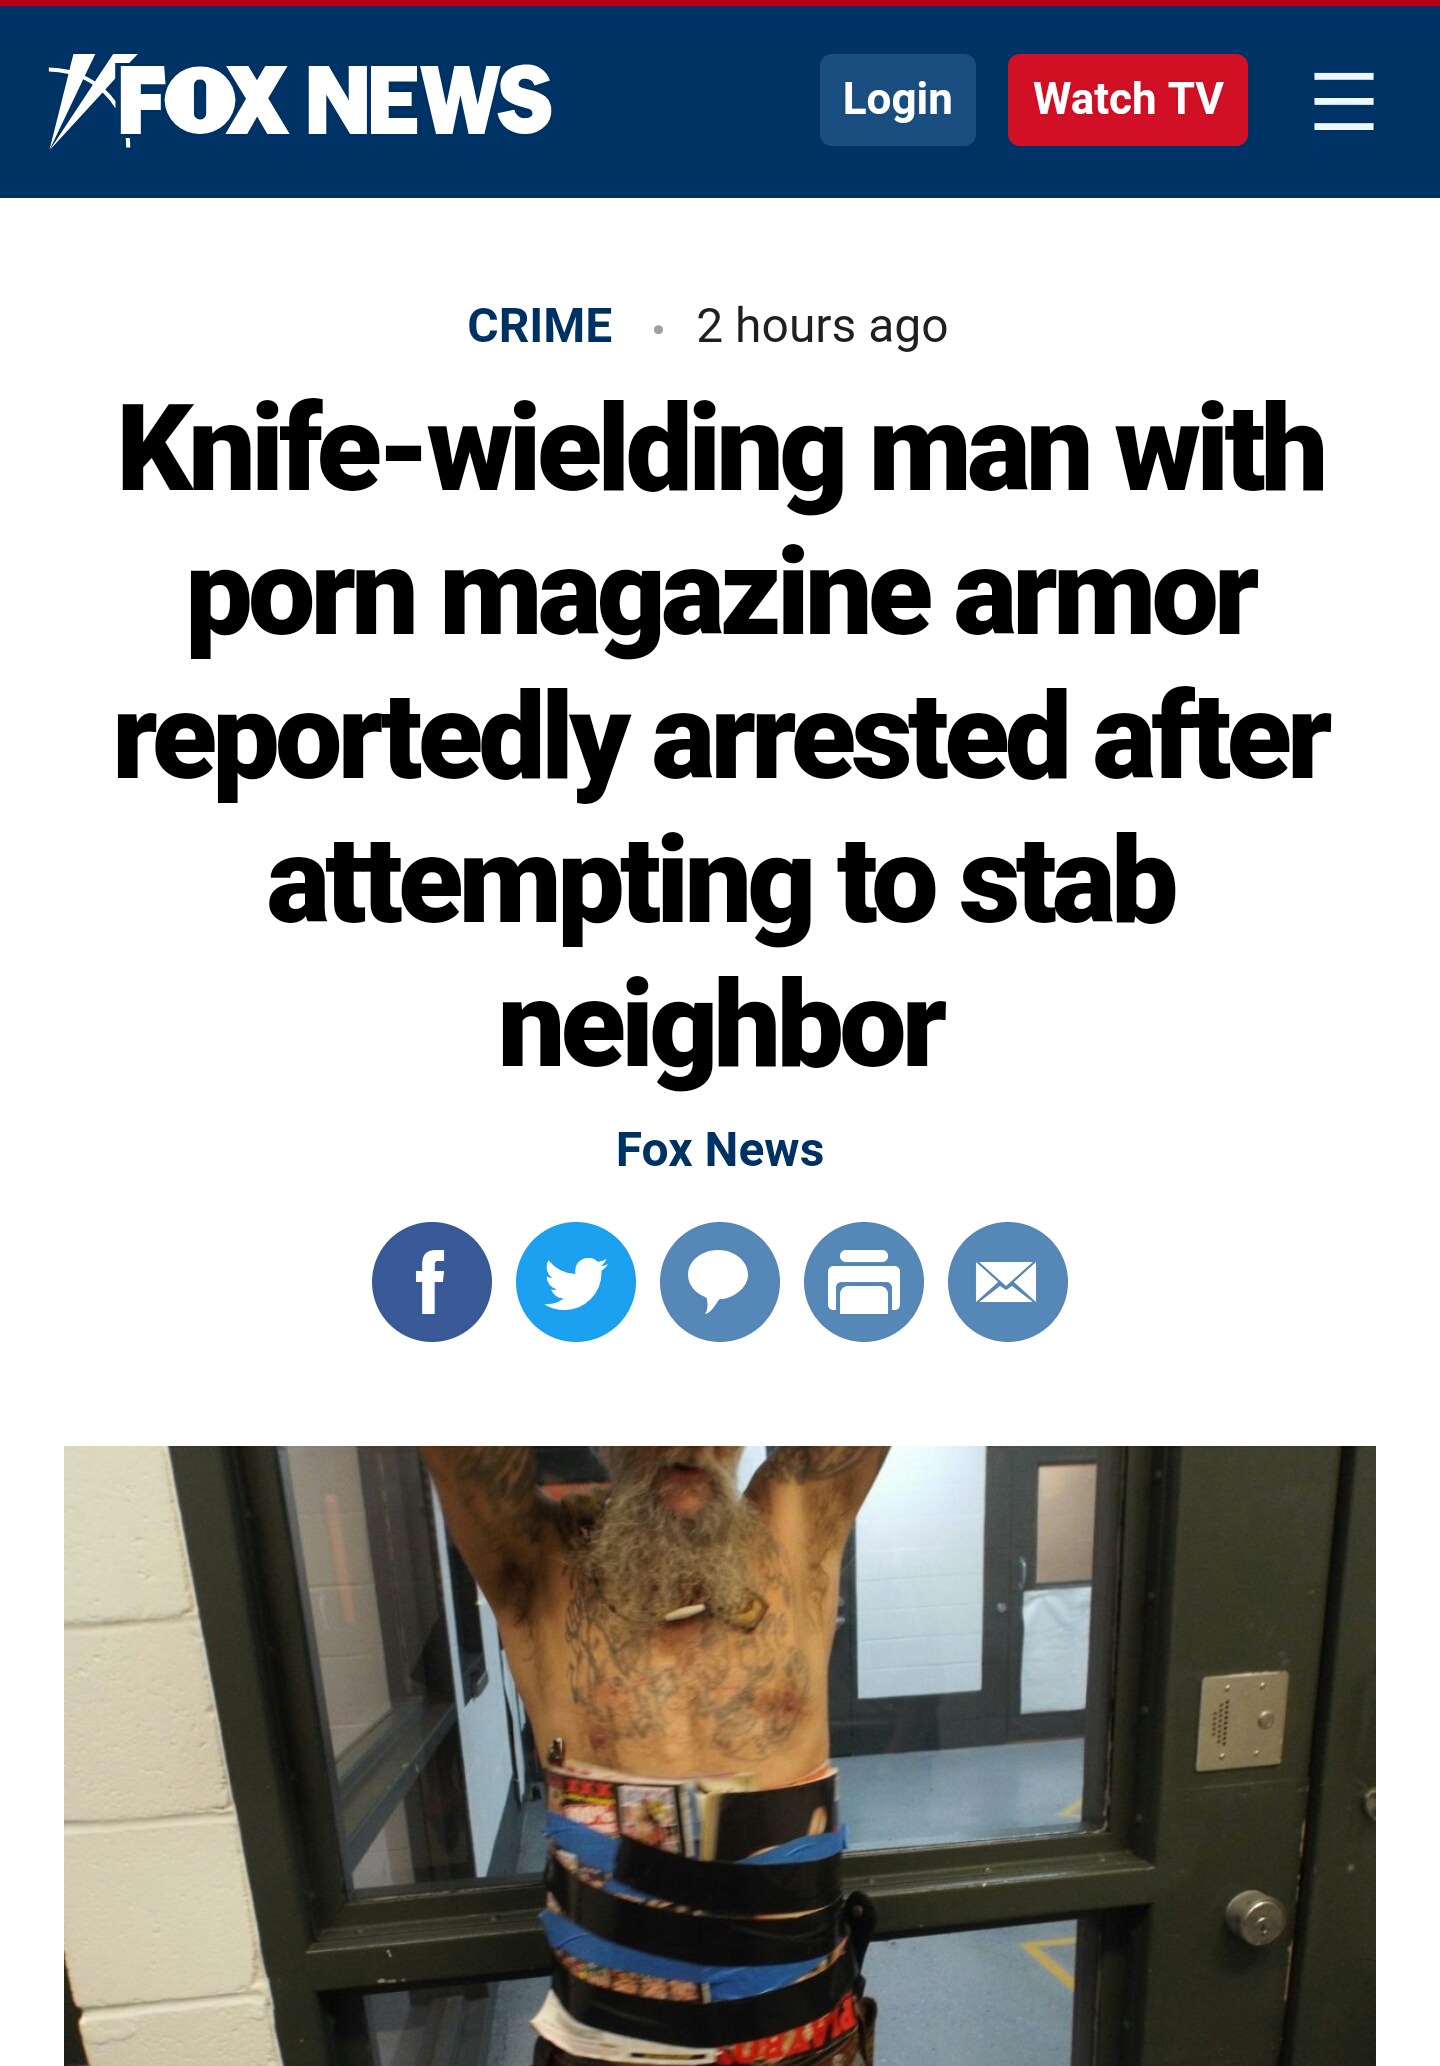 arm - Fox News Login Watch Tv Crime 2 hours ago Knifewielding man with porn magazine armor reportedly arrested after attempting to stab neighbor Fox News 00000